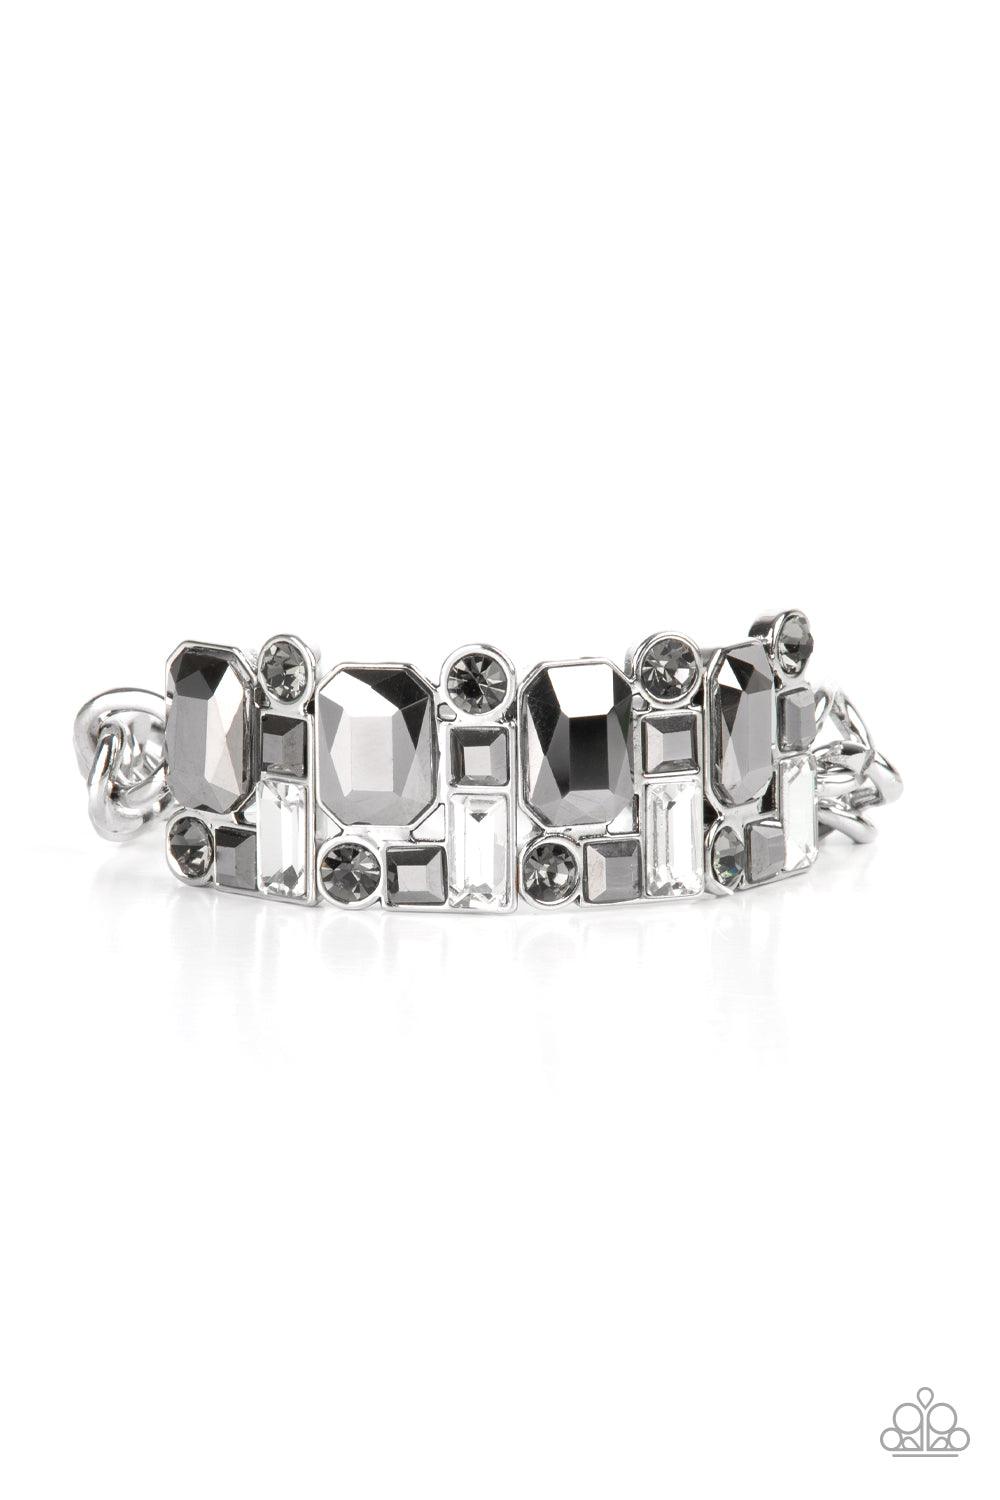 Paparazzi Accessories Urban Crest - Silver A mismatched collision of hematite, smoky, and white rhinestone encrusted frames are threaded along a stretchy band that attaches to a chunky strand of silver chain, creating jaw-dropping dazzle across the front